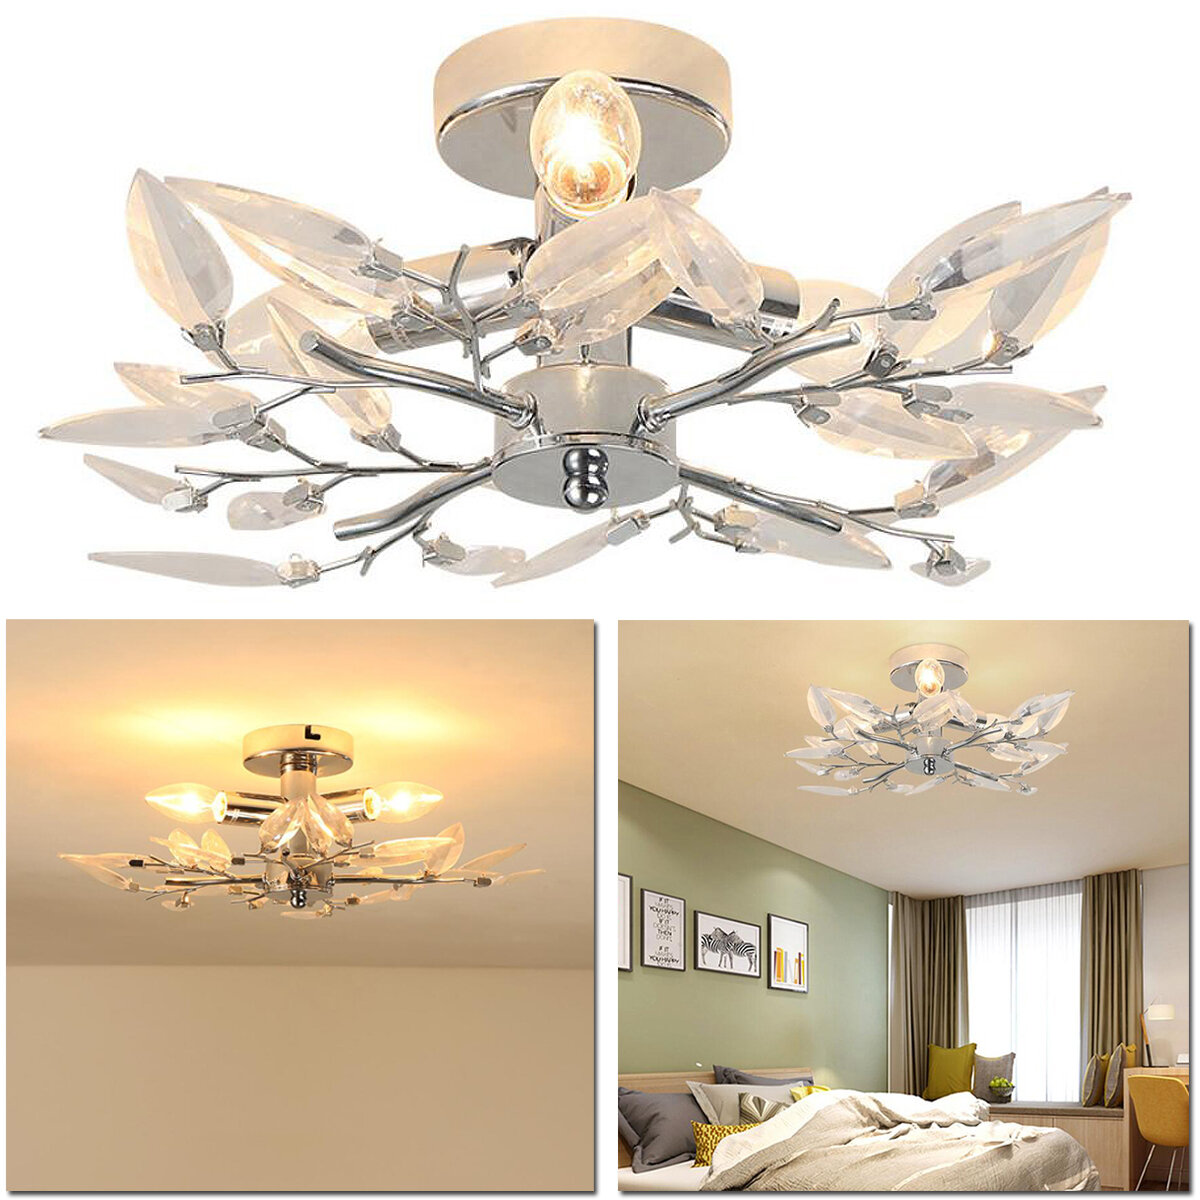 Acrylic Leaf Arms Ceiling Light Led Living Bedroom Room Lamp